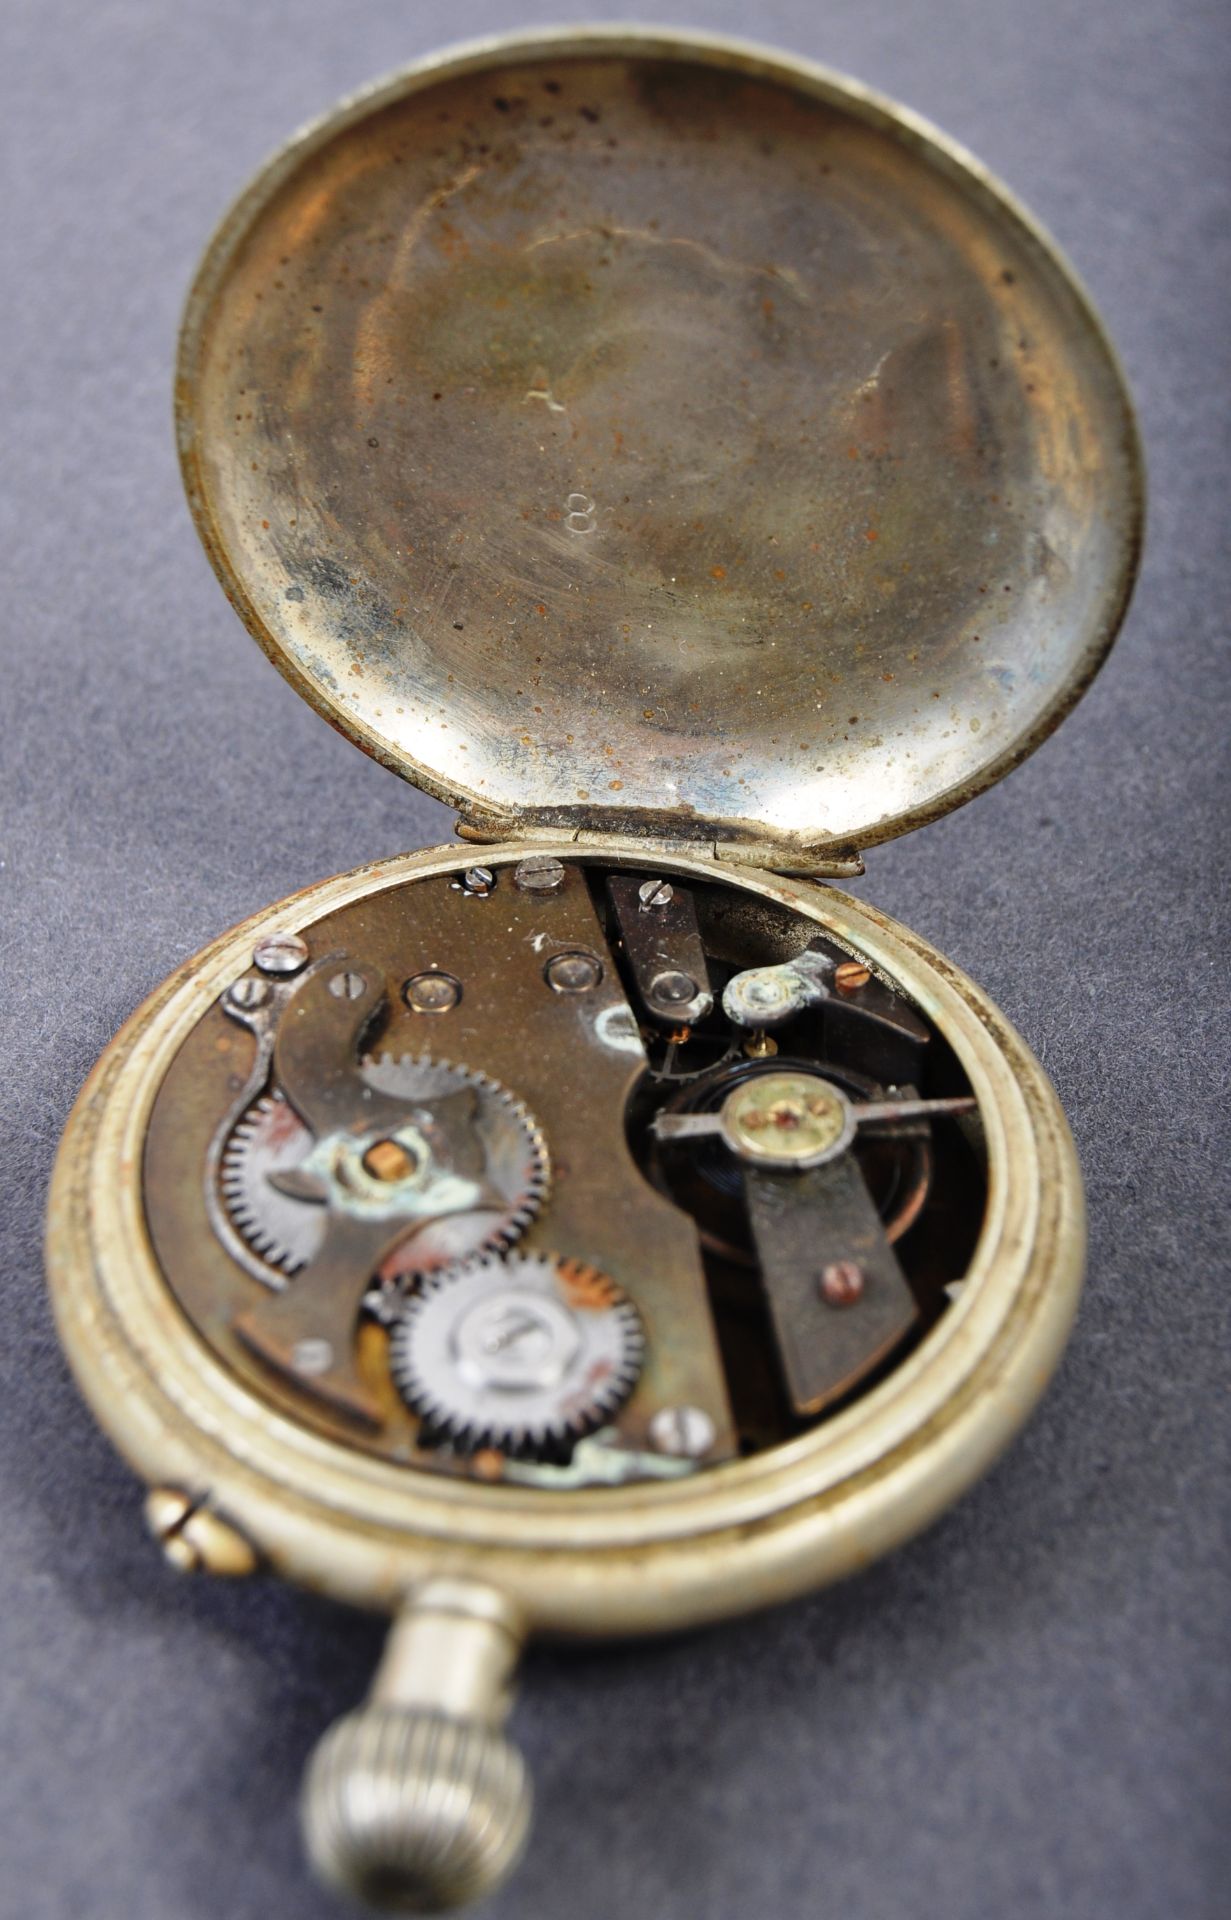 MAHATMA GANDHI - SILVER PLATE POCKET WATCH GIFTED FROM GANDHI - Image 3 of 7